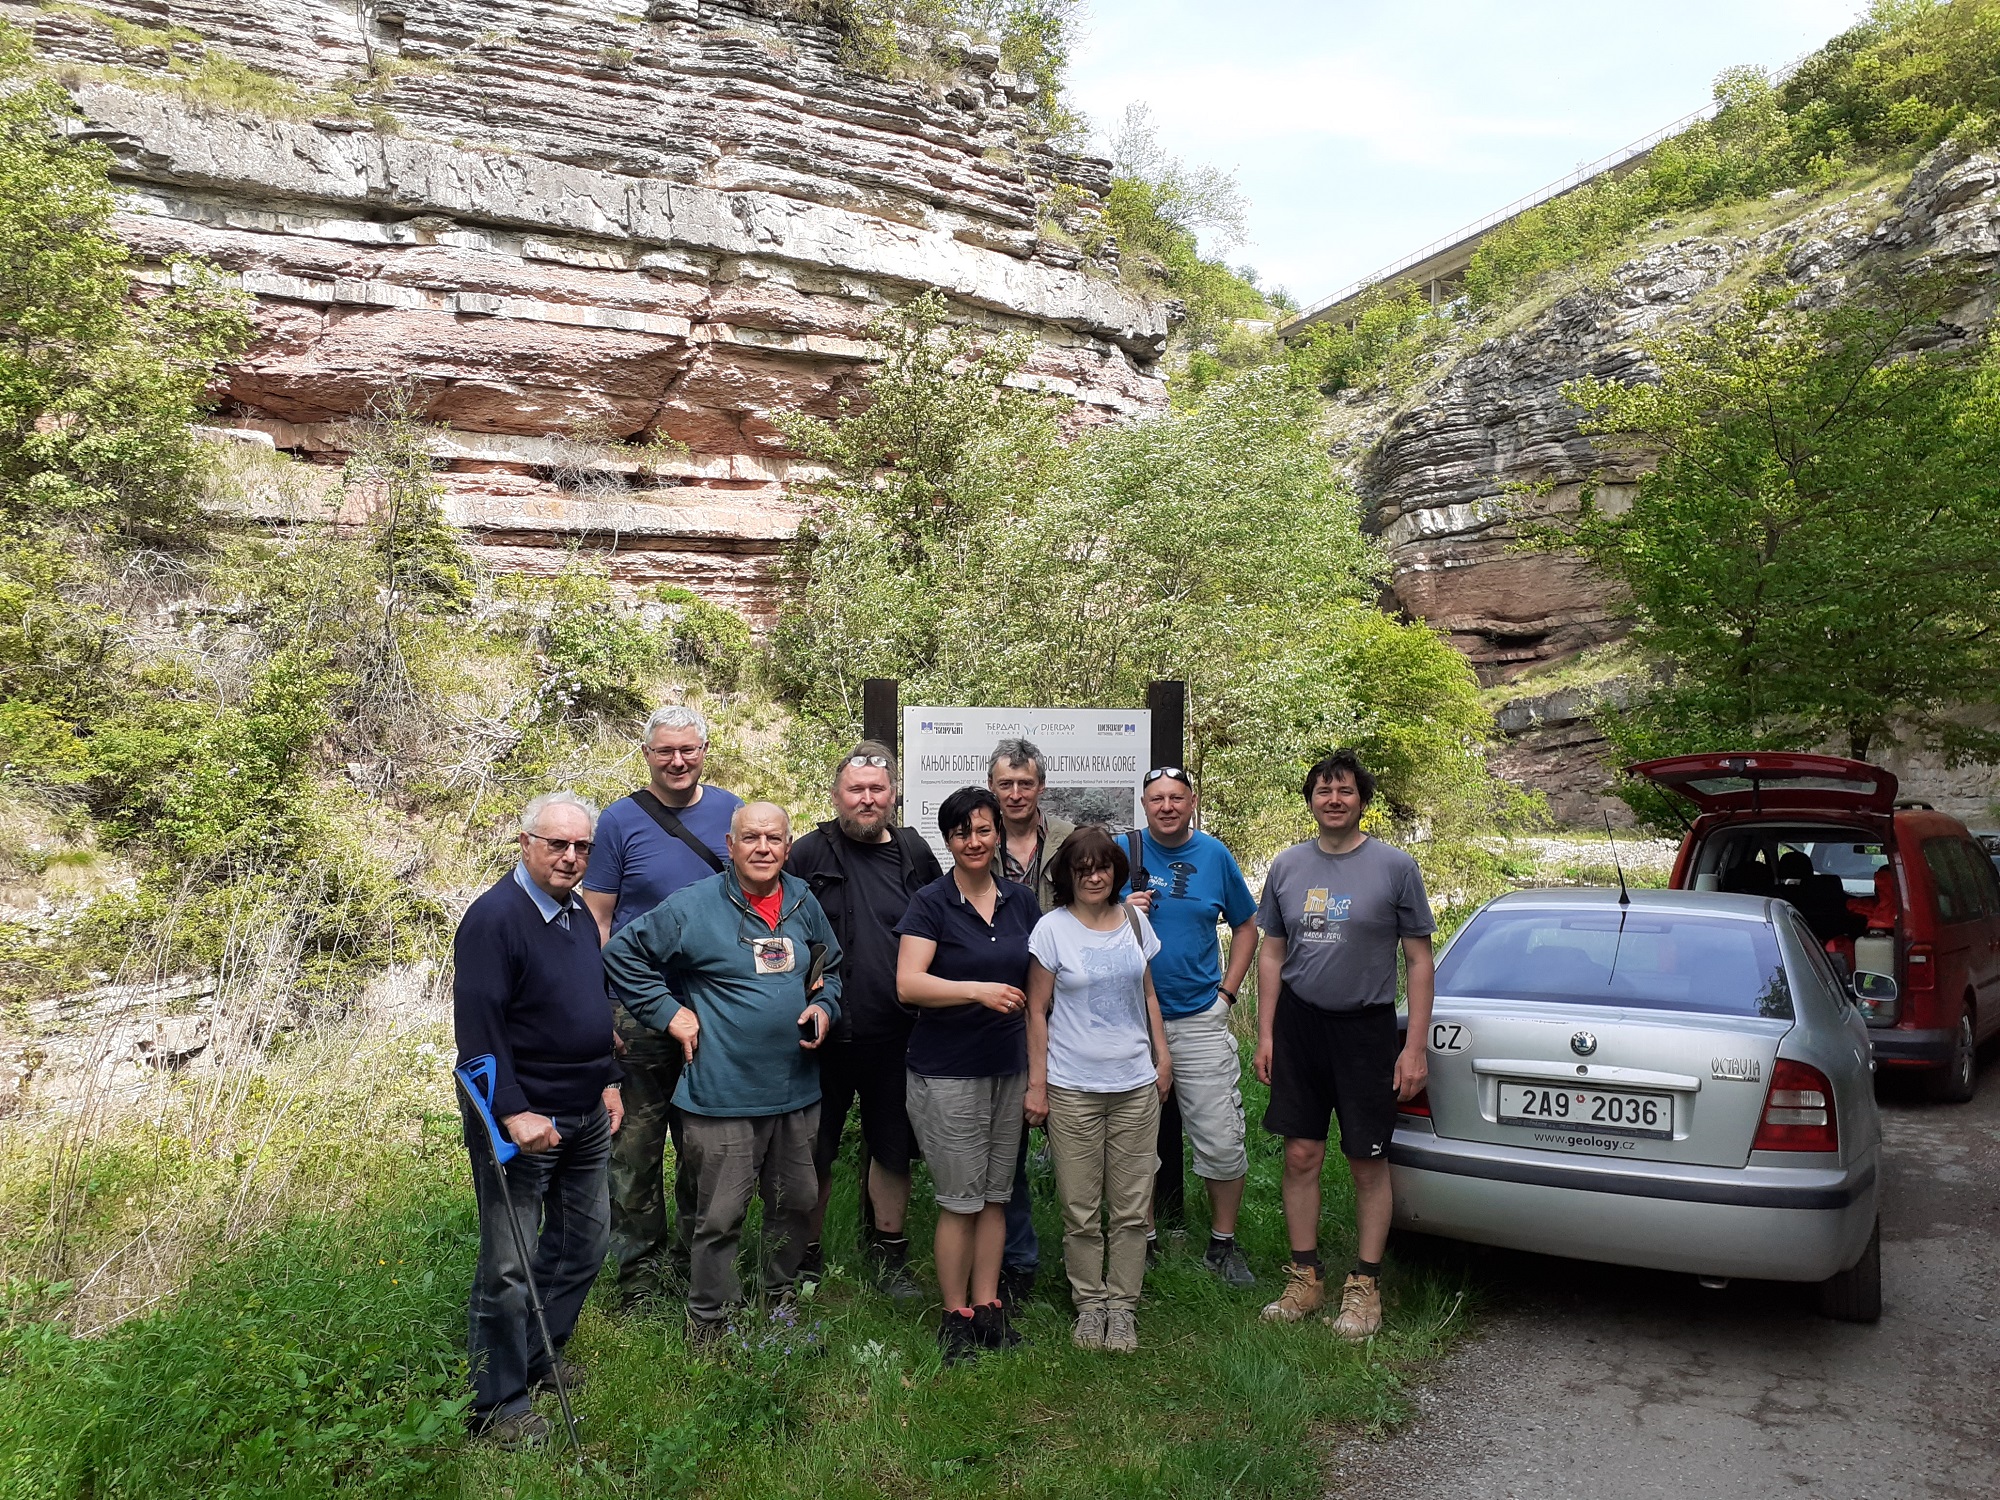 Visit of a geologist from the Czech Republic